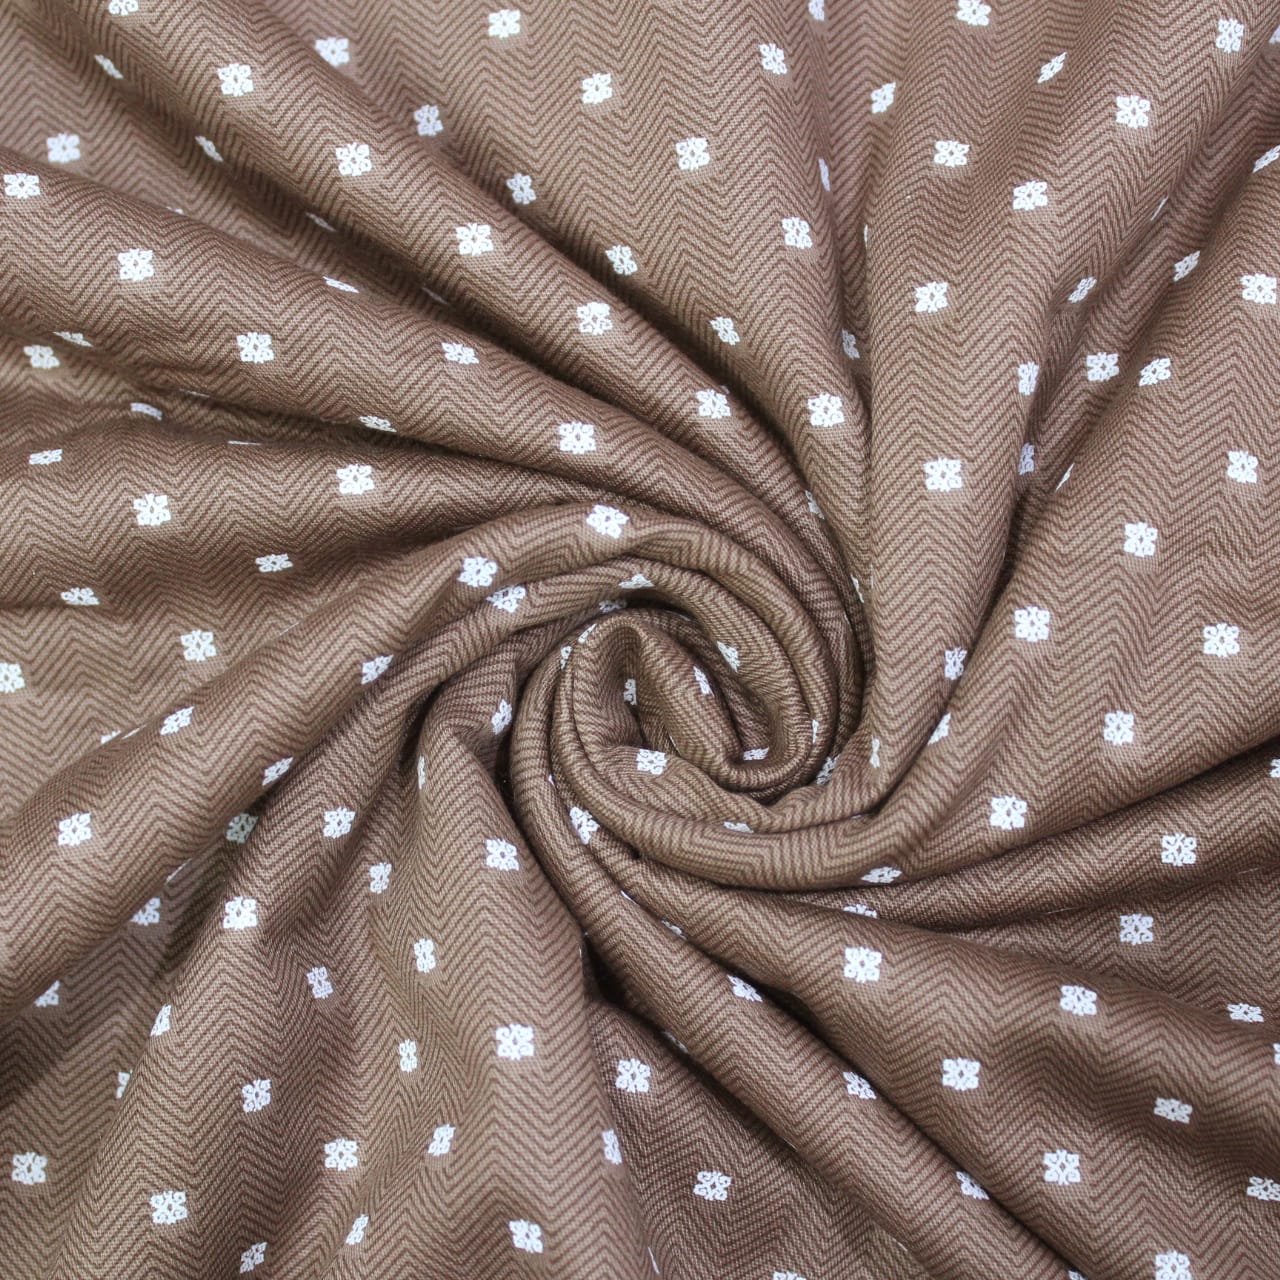 Pearl Texture Floral Print 300TC Cotton Dohar Comforter In Coffee Brown At Best Prices